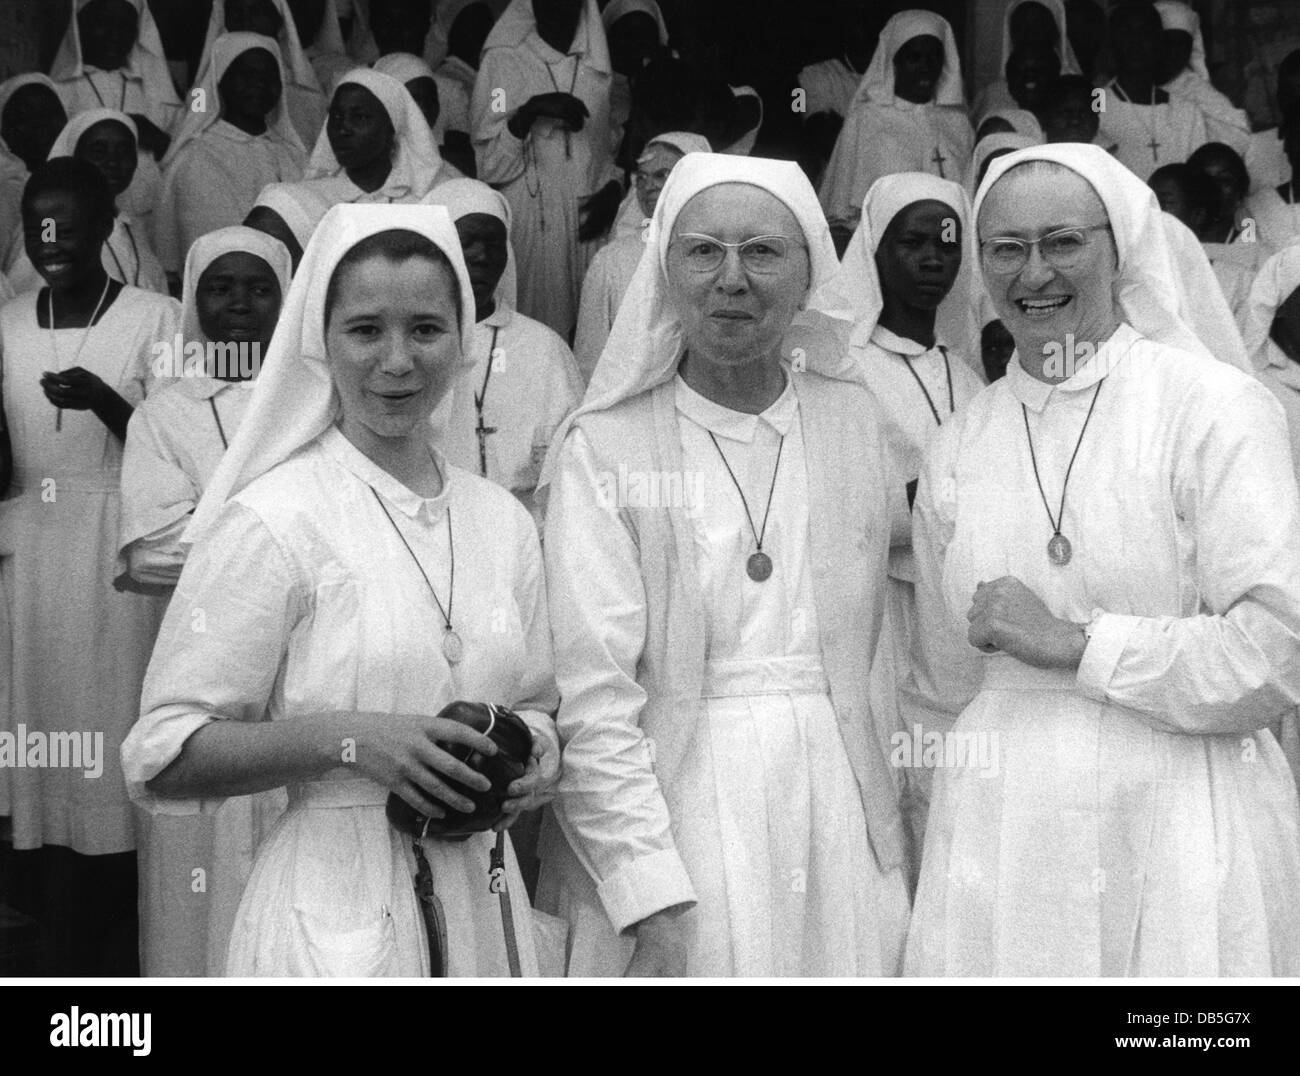 geography / travel, Congo, events, Simba uprising 1964 - 1965, nuns liberated by mercenaries, Bunia, Ituri, Orientale province, December 1964, women, Congo Crisis, civil war, Africa, Democratic Republic of Congo, 20th century, historic, historical, 1960s, people, Additional-Rights-Clearences-Not Available Stock Photo